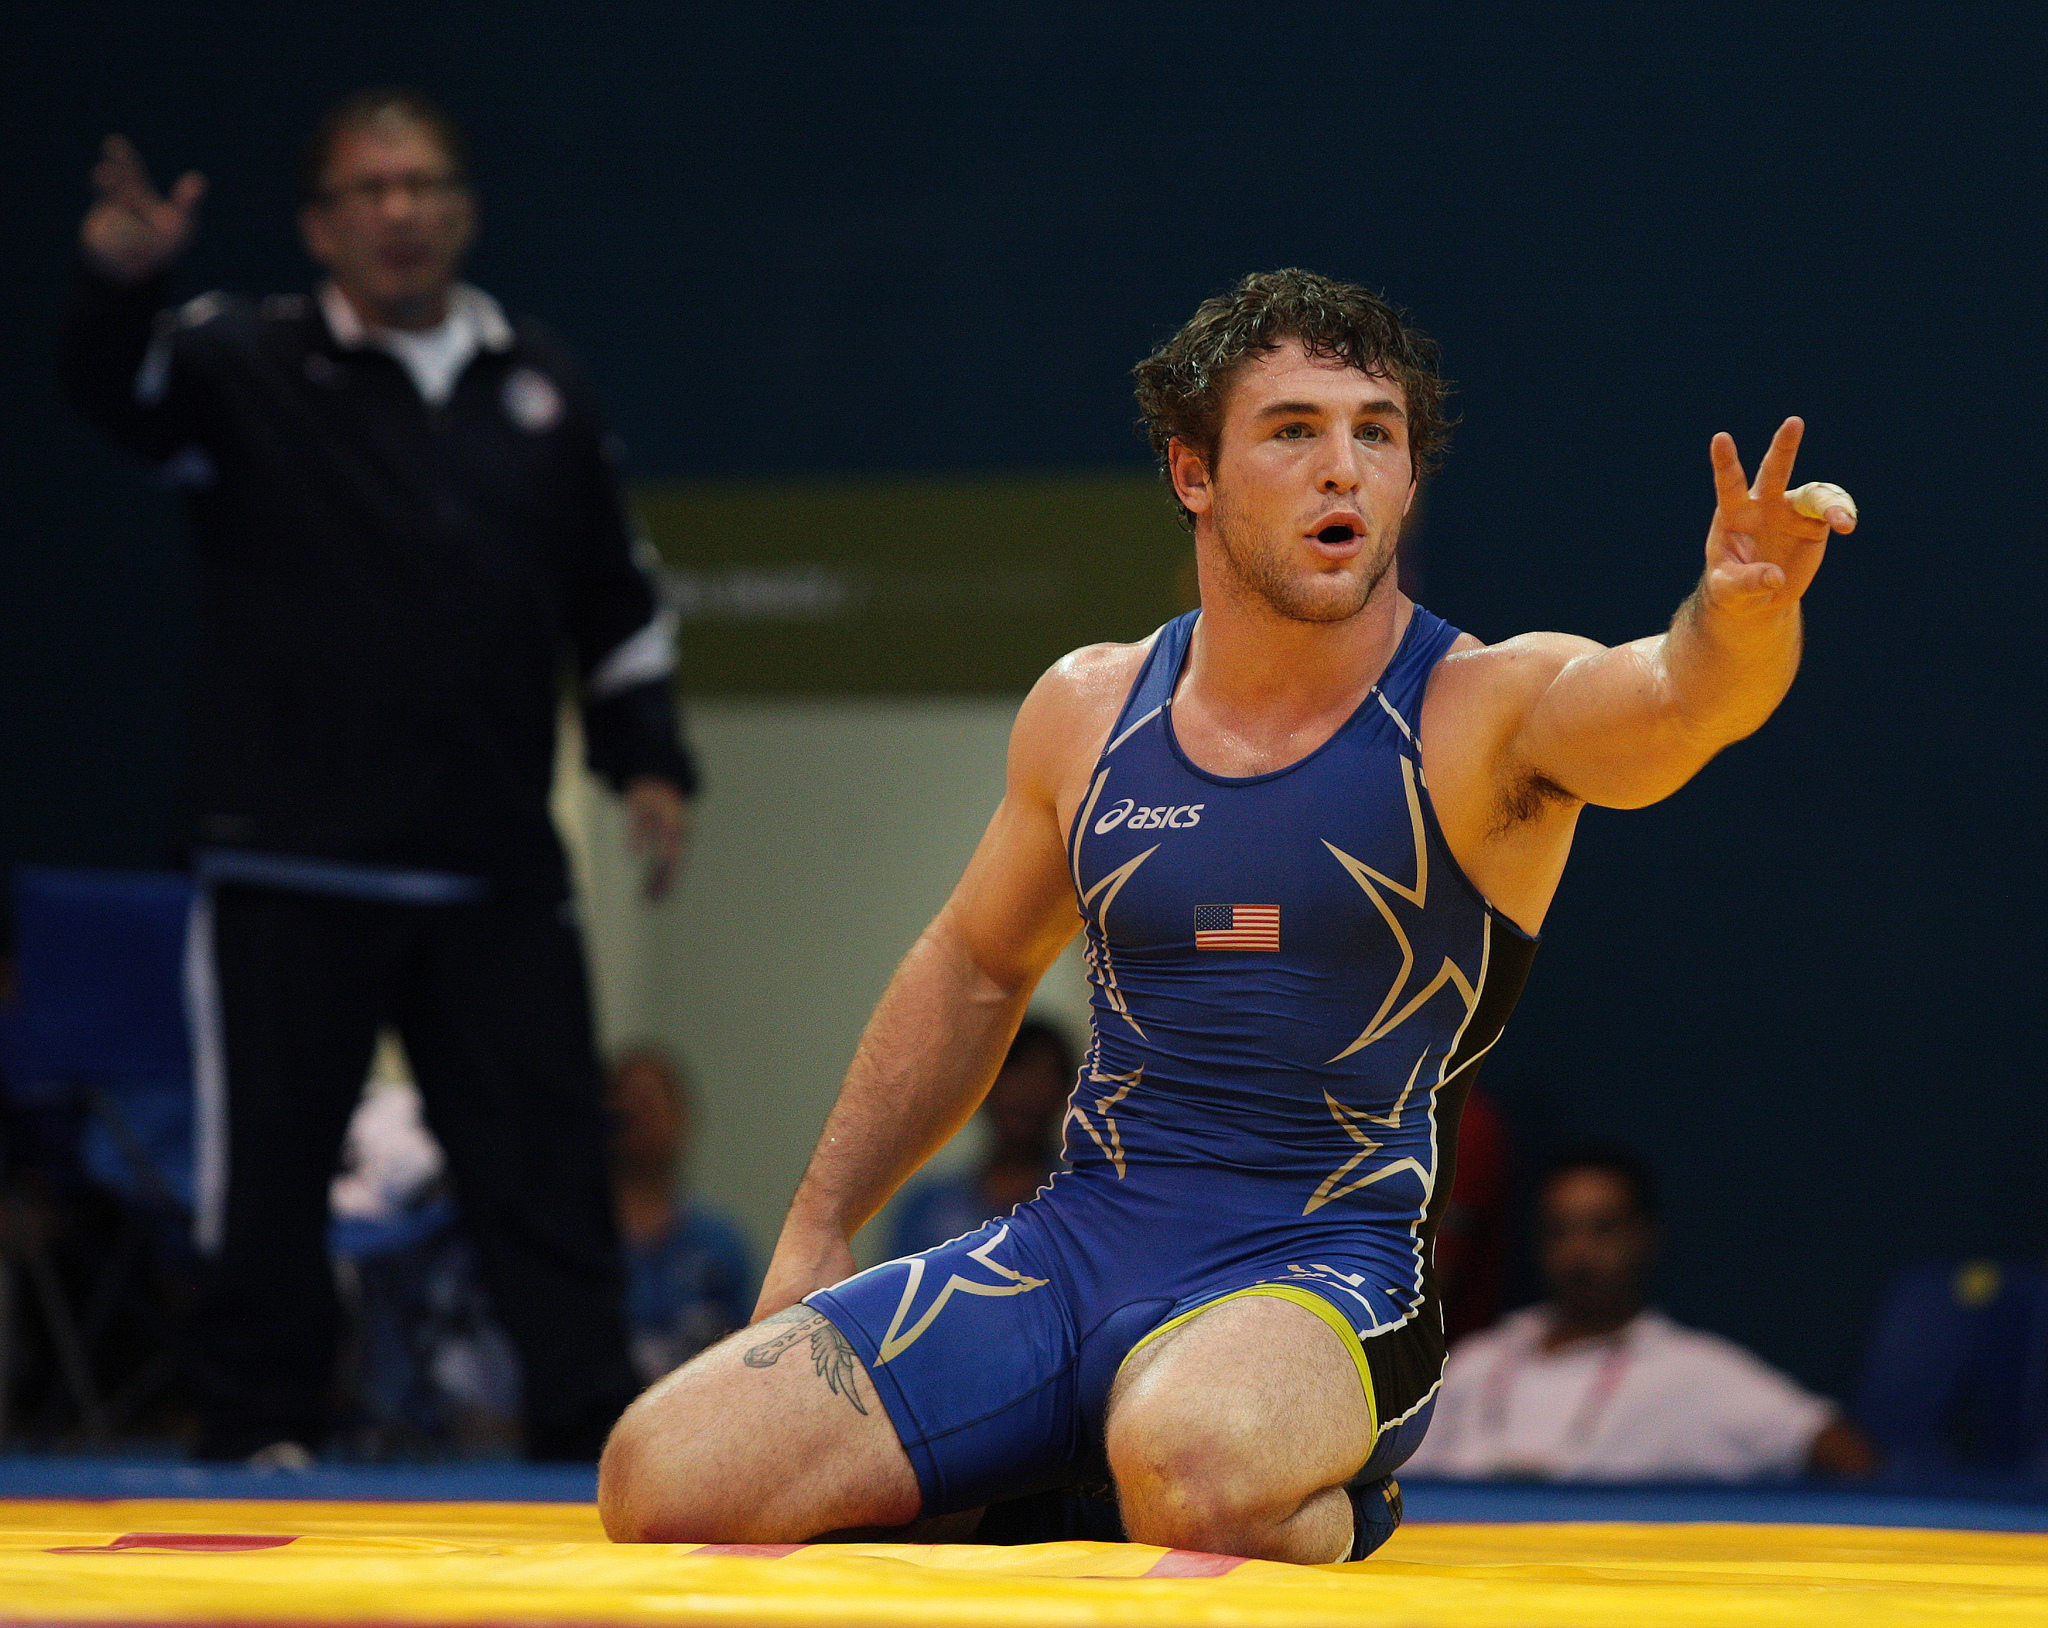 Stevens Point Greco-Roman Wrestler Amped Up For Rio Olympics